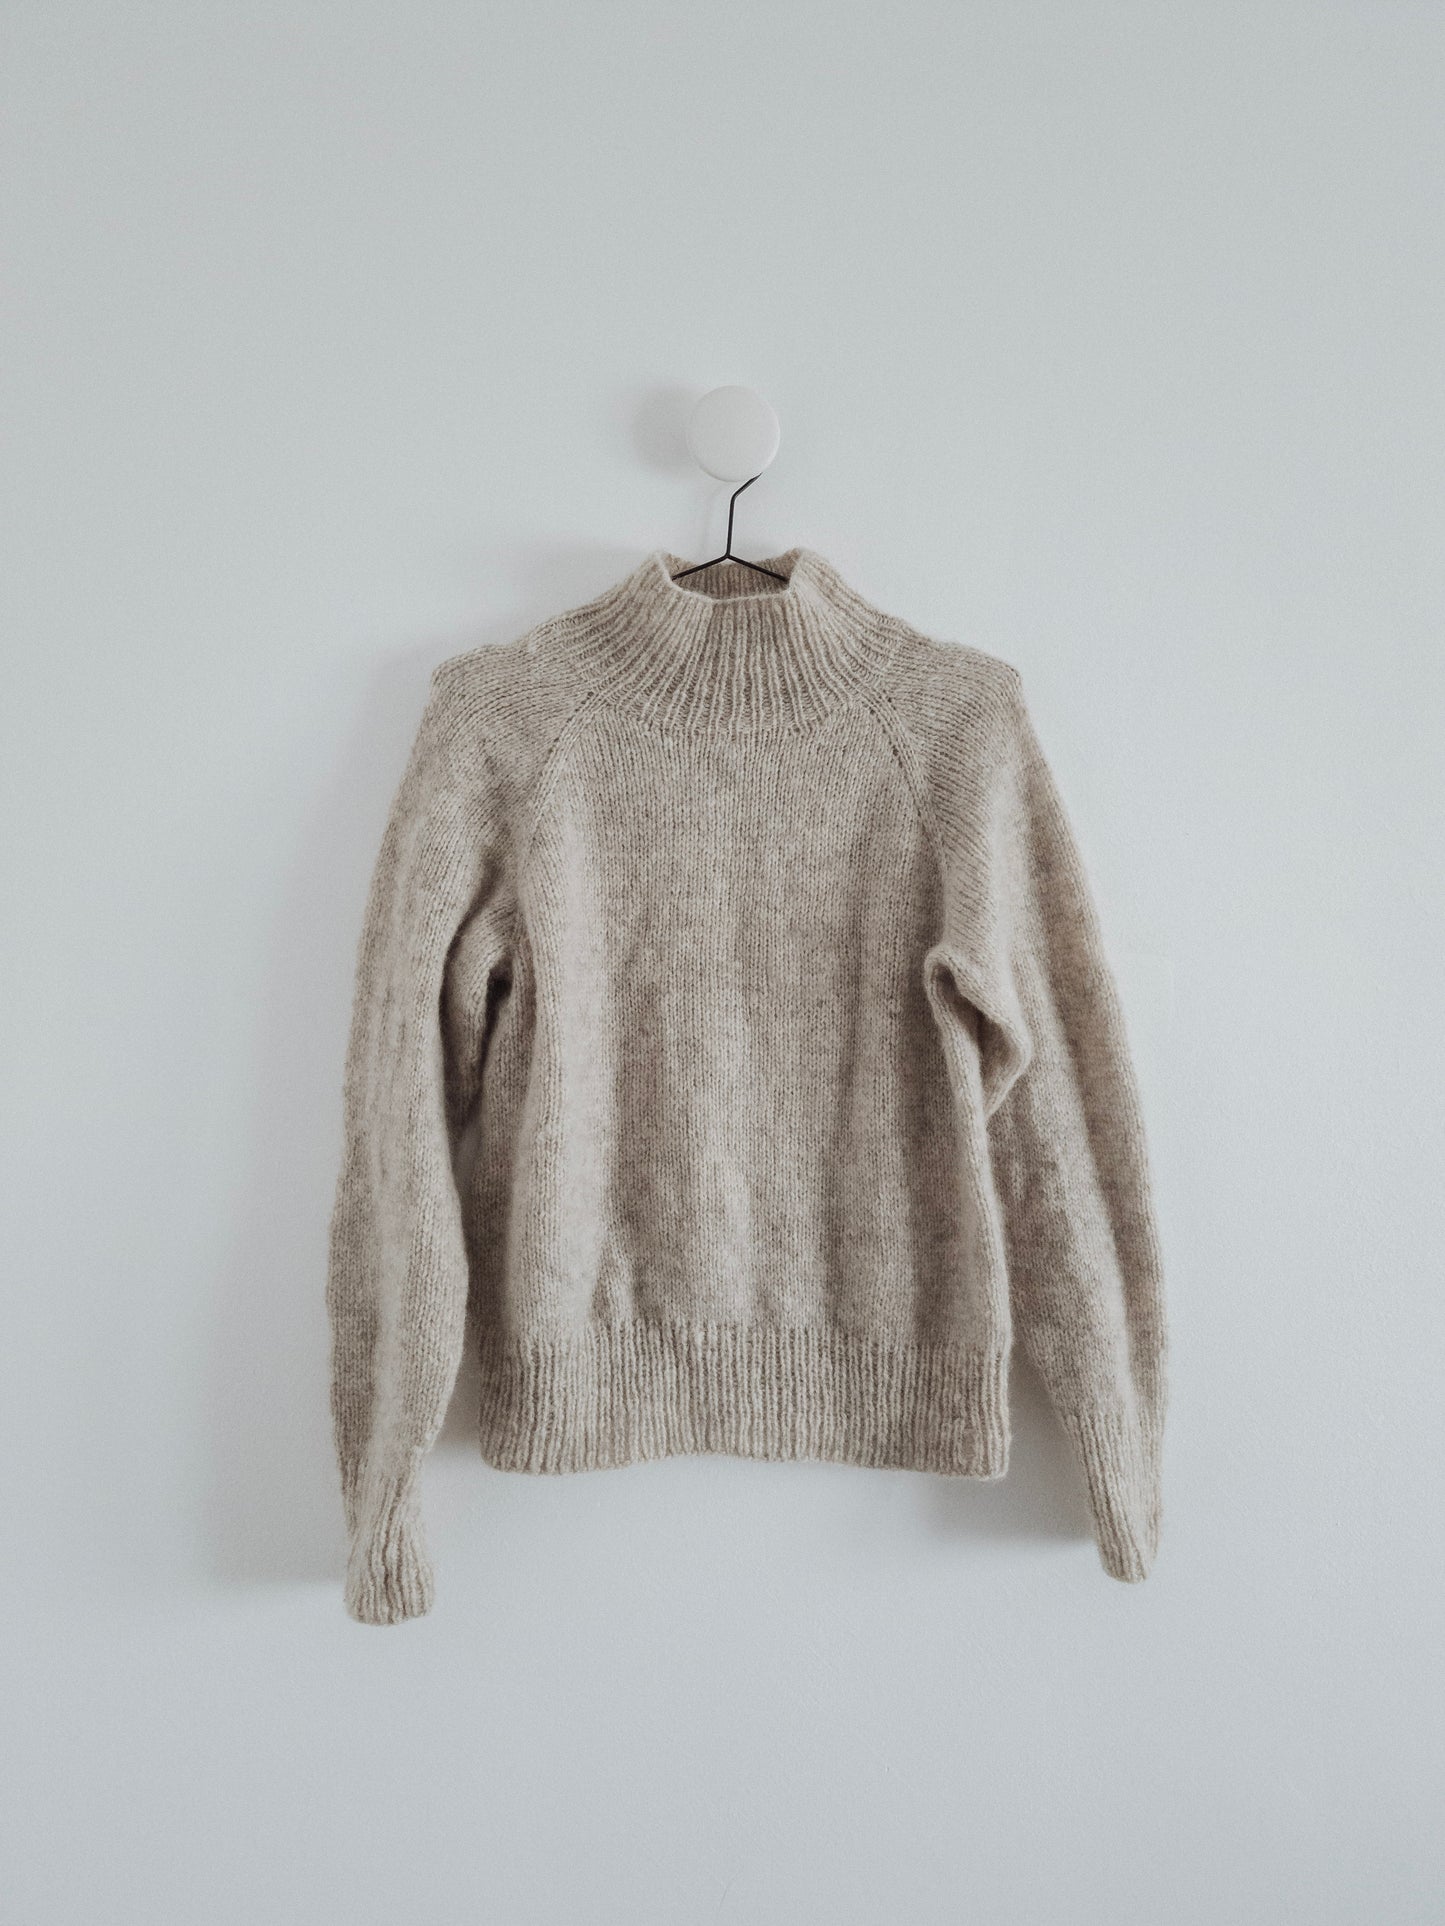 Minimalist photo of a very light grey, soft, hand-knit raglan sweater with a mock turtleneck, crafted by Woodlandsknits from Nutiden unspun yarn. The sweater is displayed on a black hanger against a white wall.